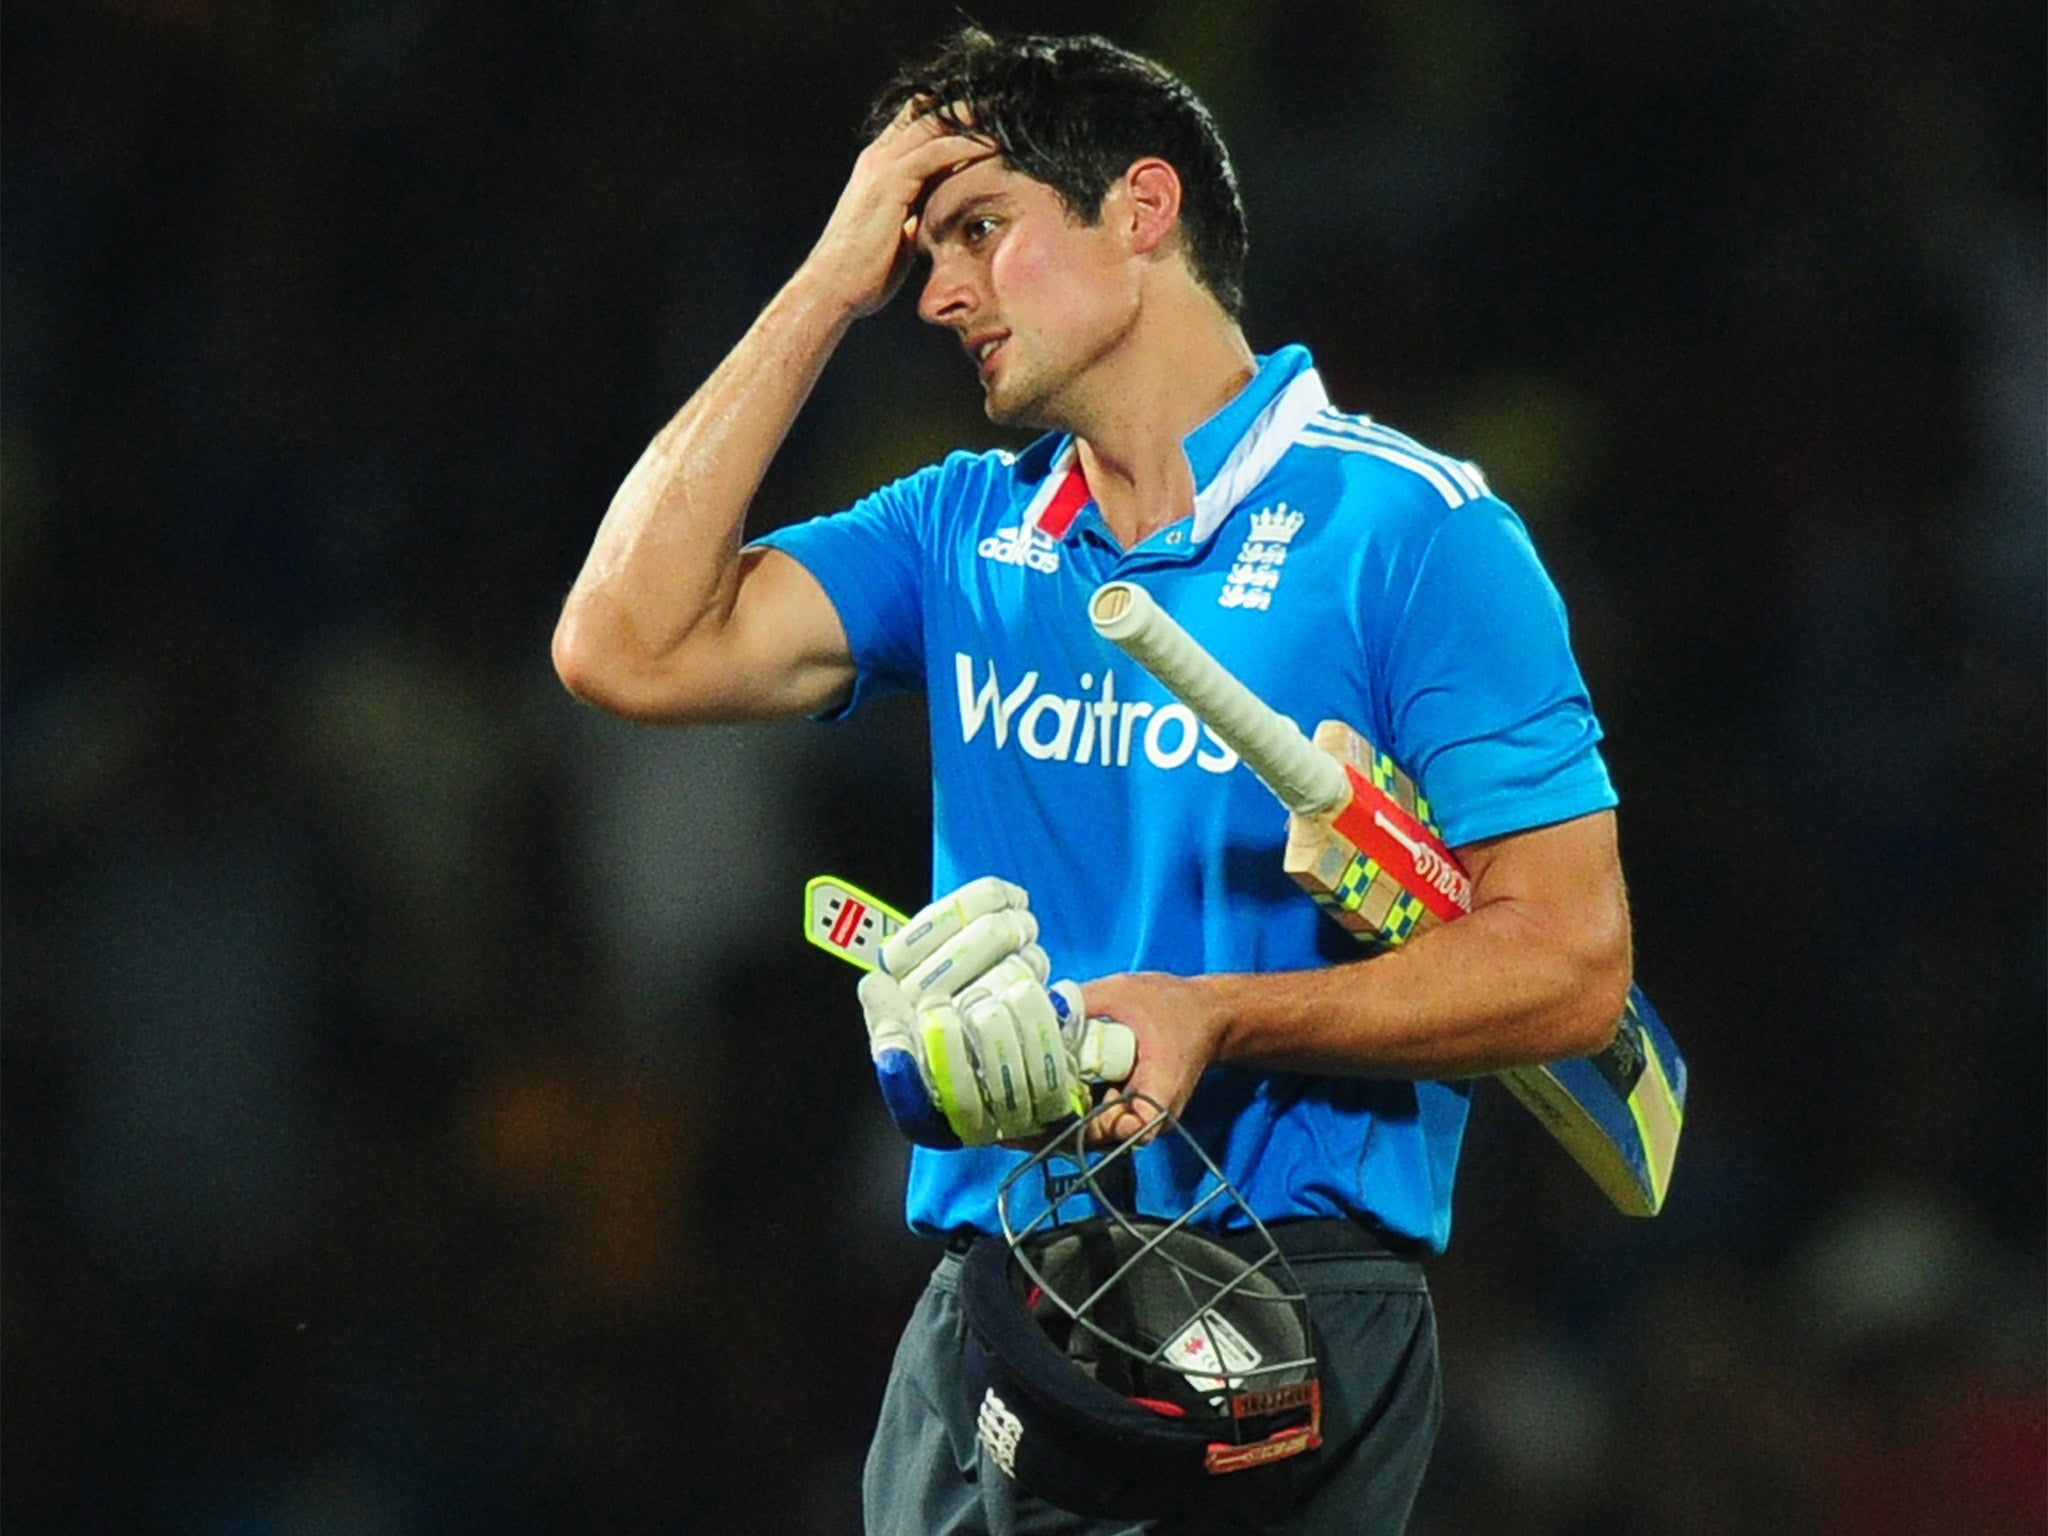 Alastair Cook is dismissed in the one-day series against Sri Lanka, where his poor form led to him losing the captaincy for the World Cup